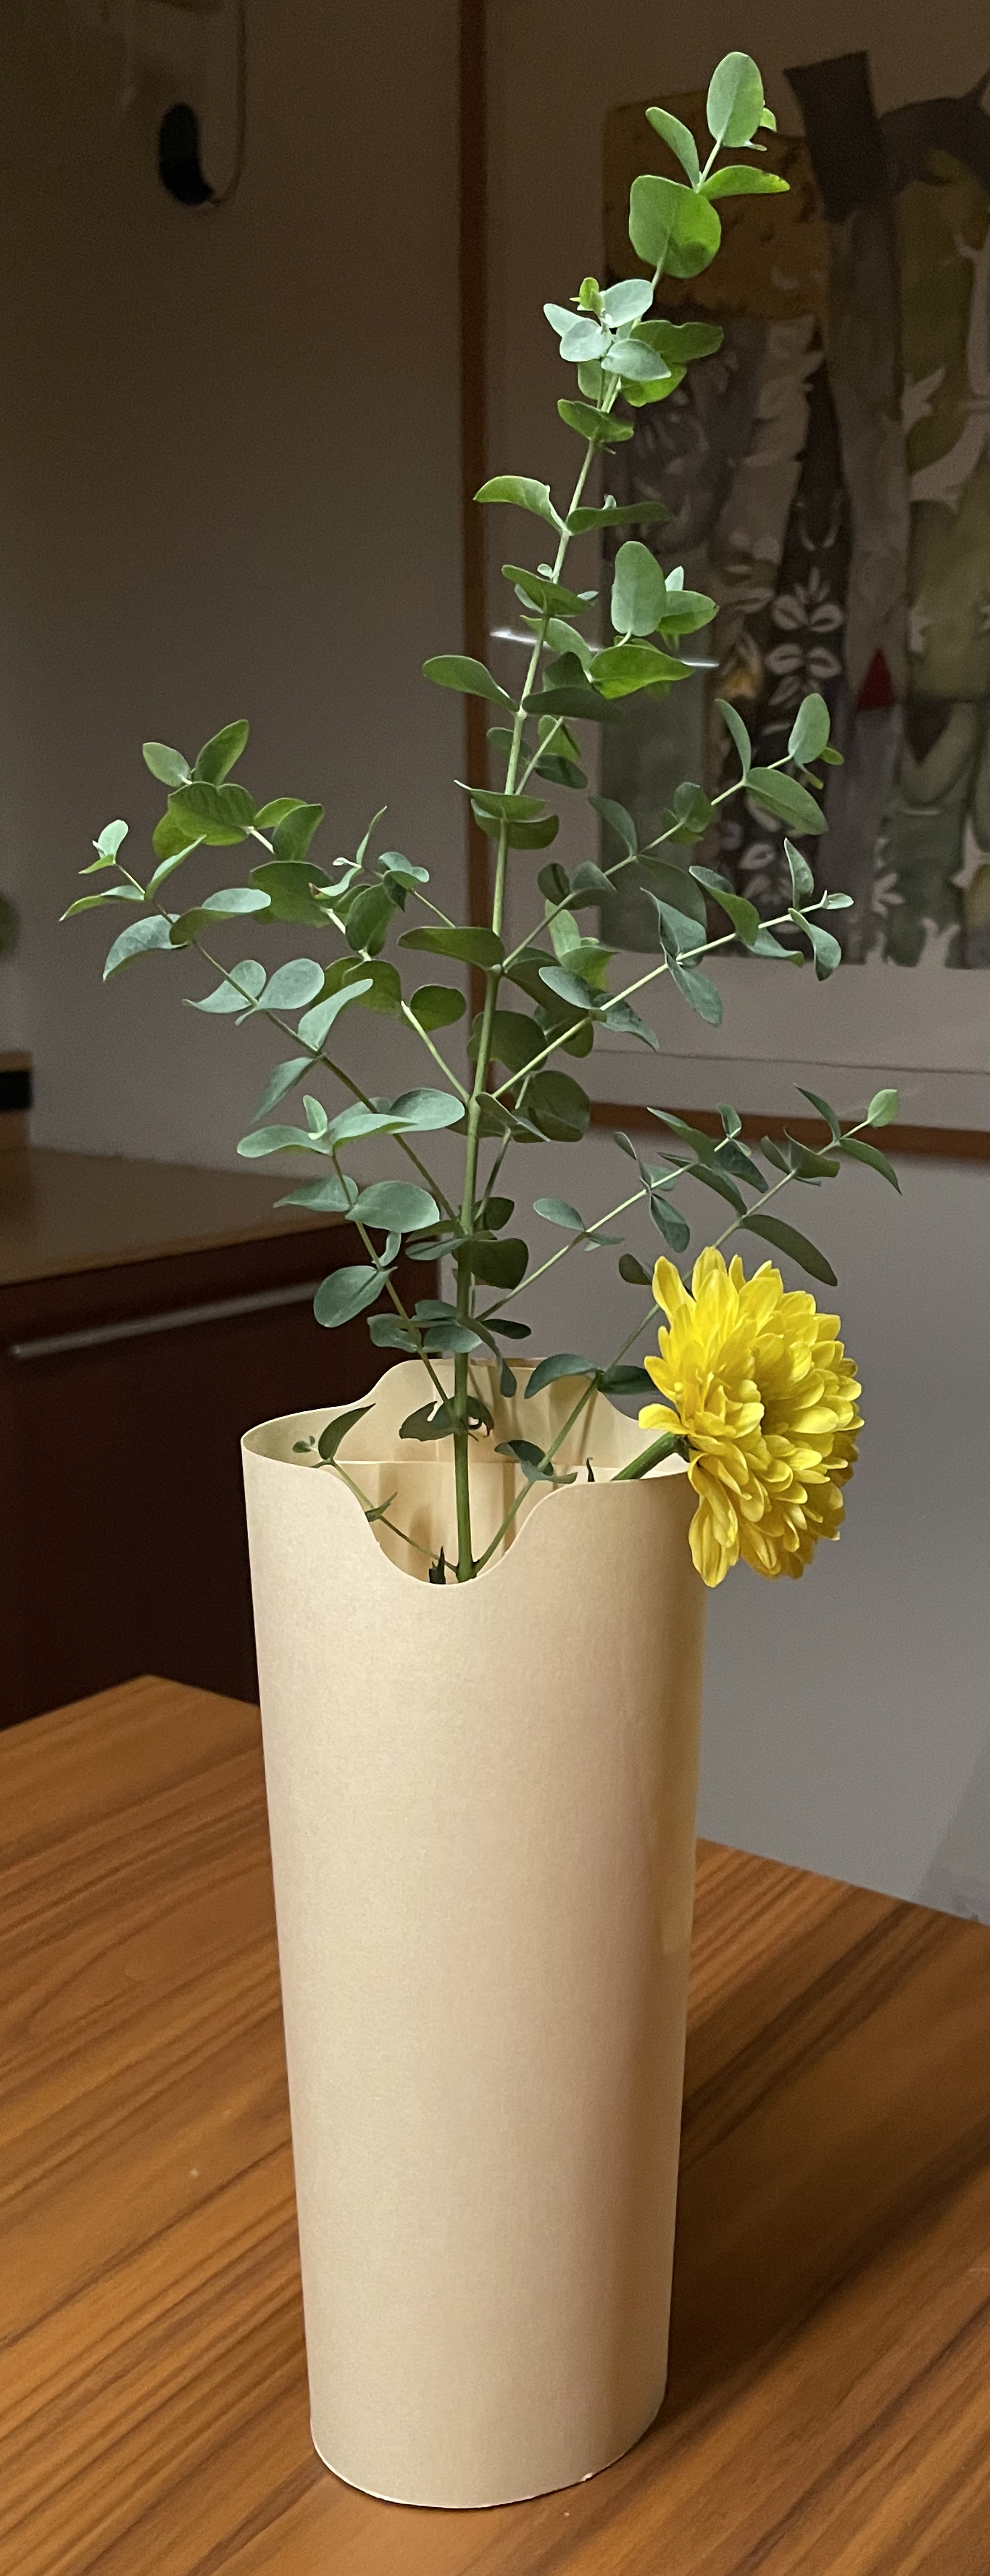 a vase made out of a manila folder sits on a kitchen counter, with a vertical frond of eucalyptus and yellow flowers emerging from the vessel